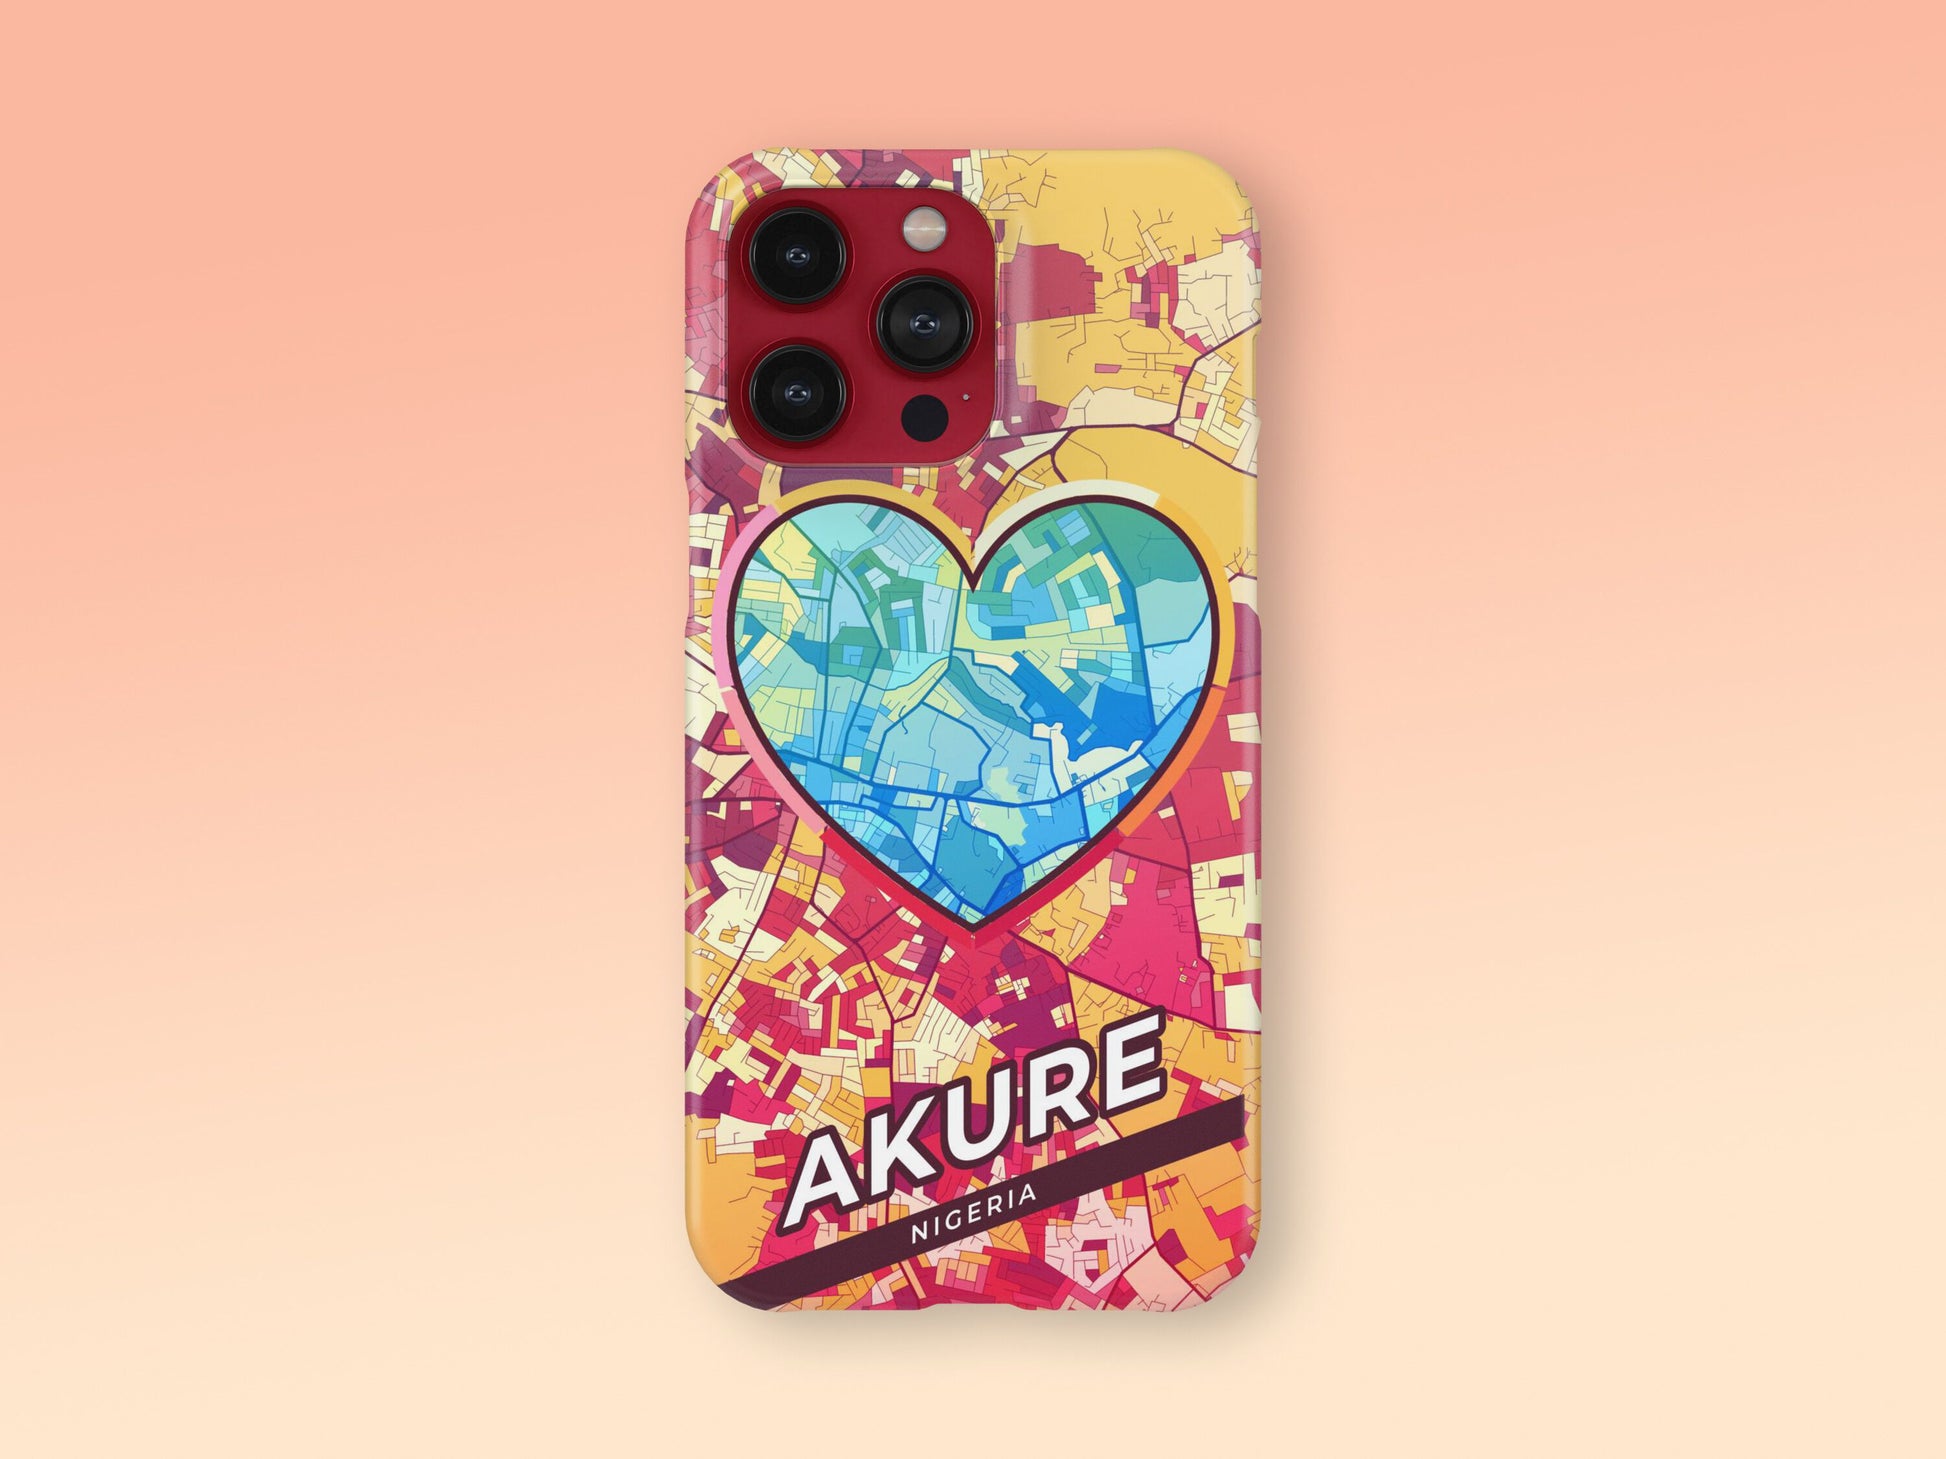 Akure Nigeria slim phone case with colorful icon. Birthday, wedding or housewarming gift. Couple match cases. 2